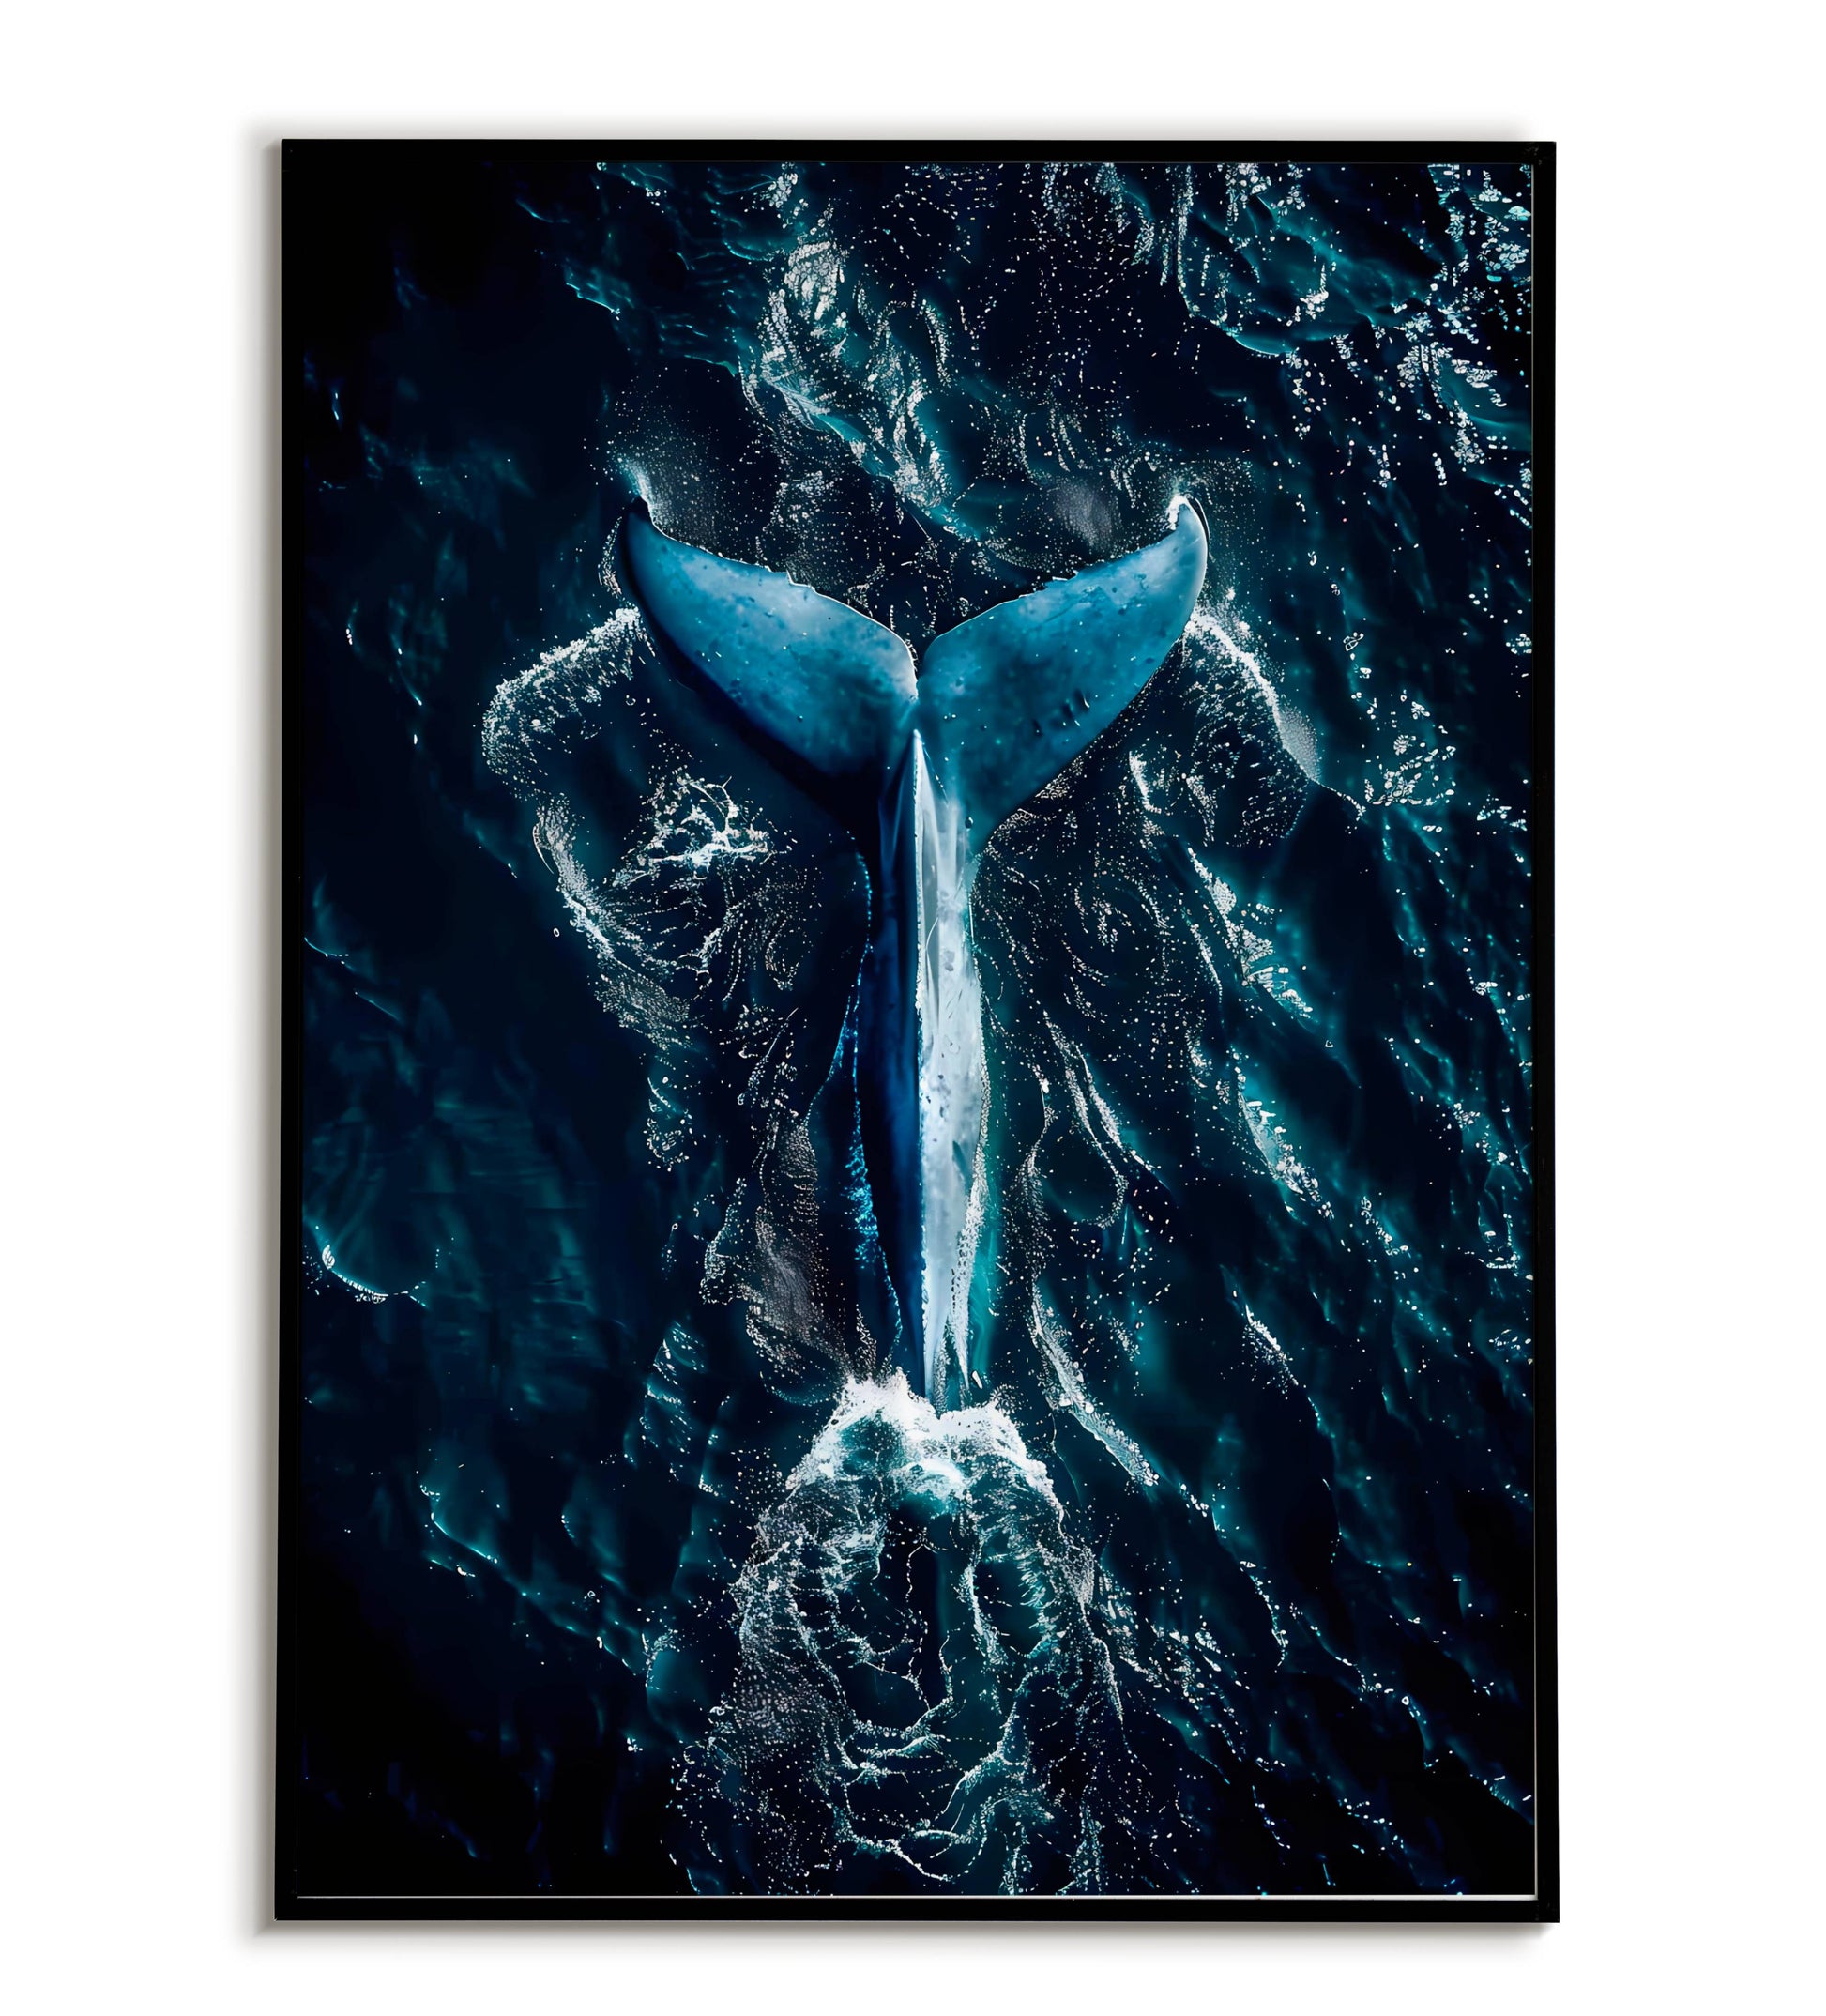 Blue Whale" abstract interpretation of a blue whale